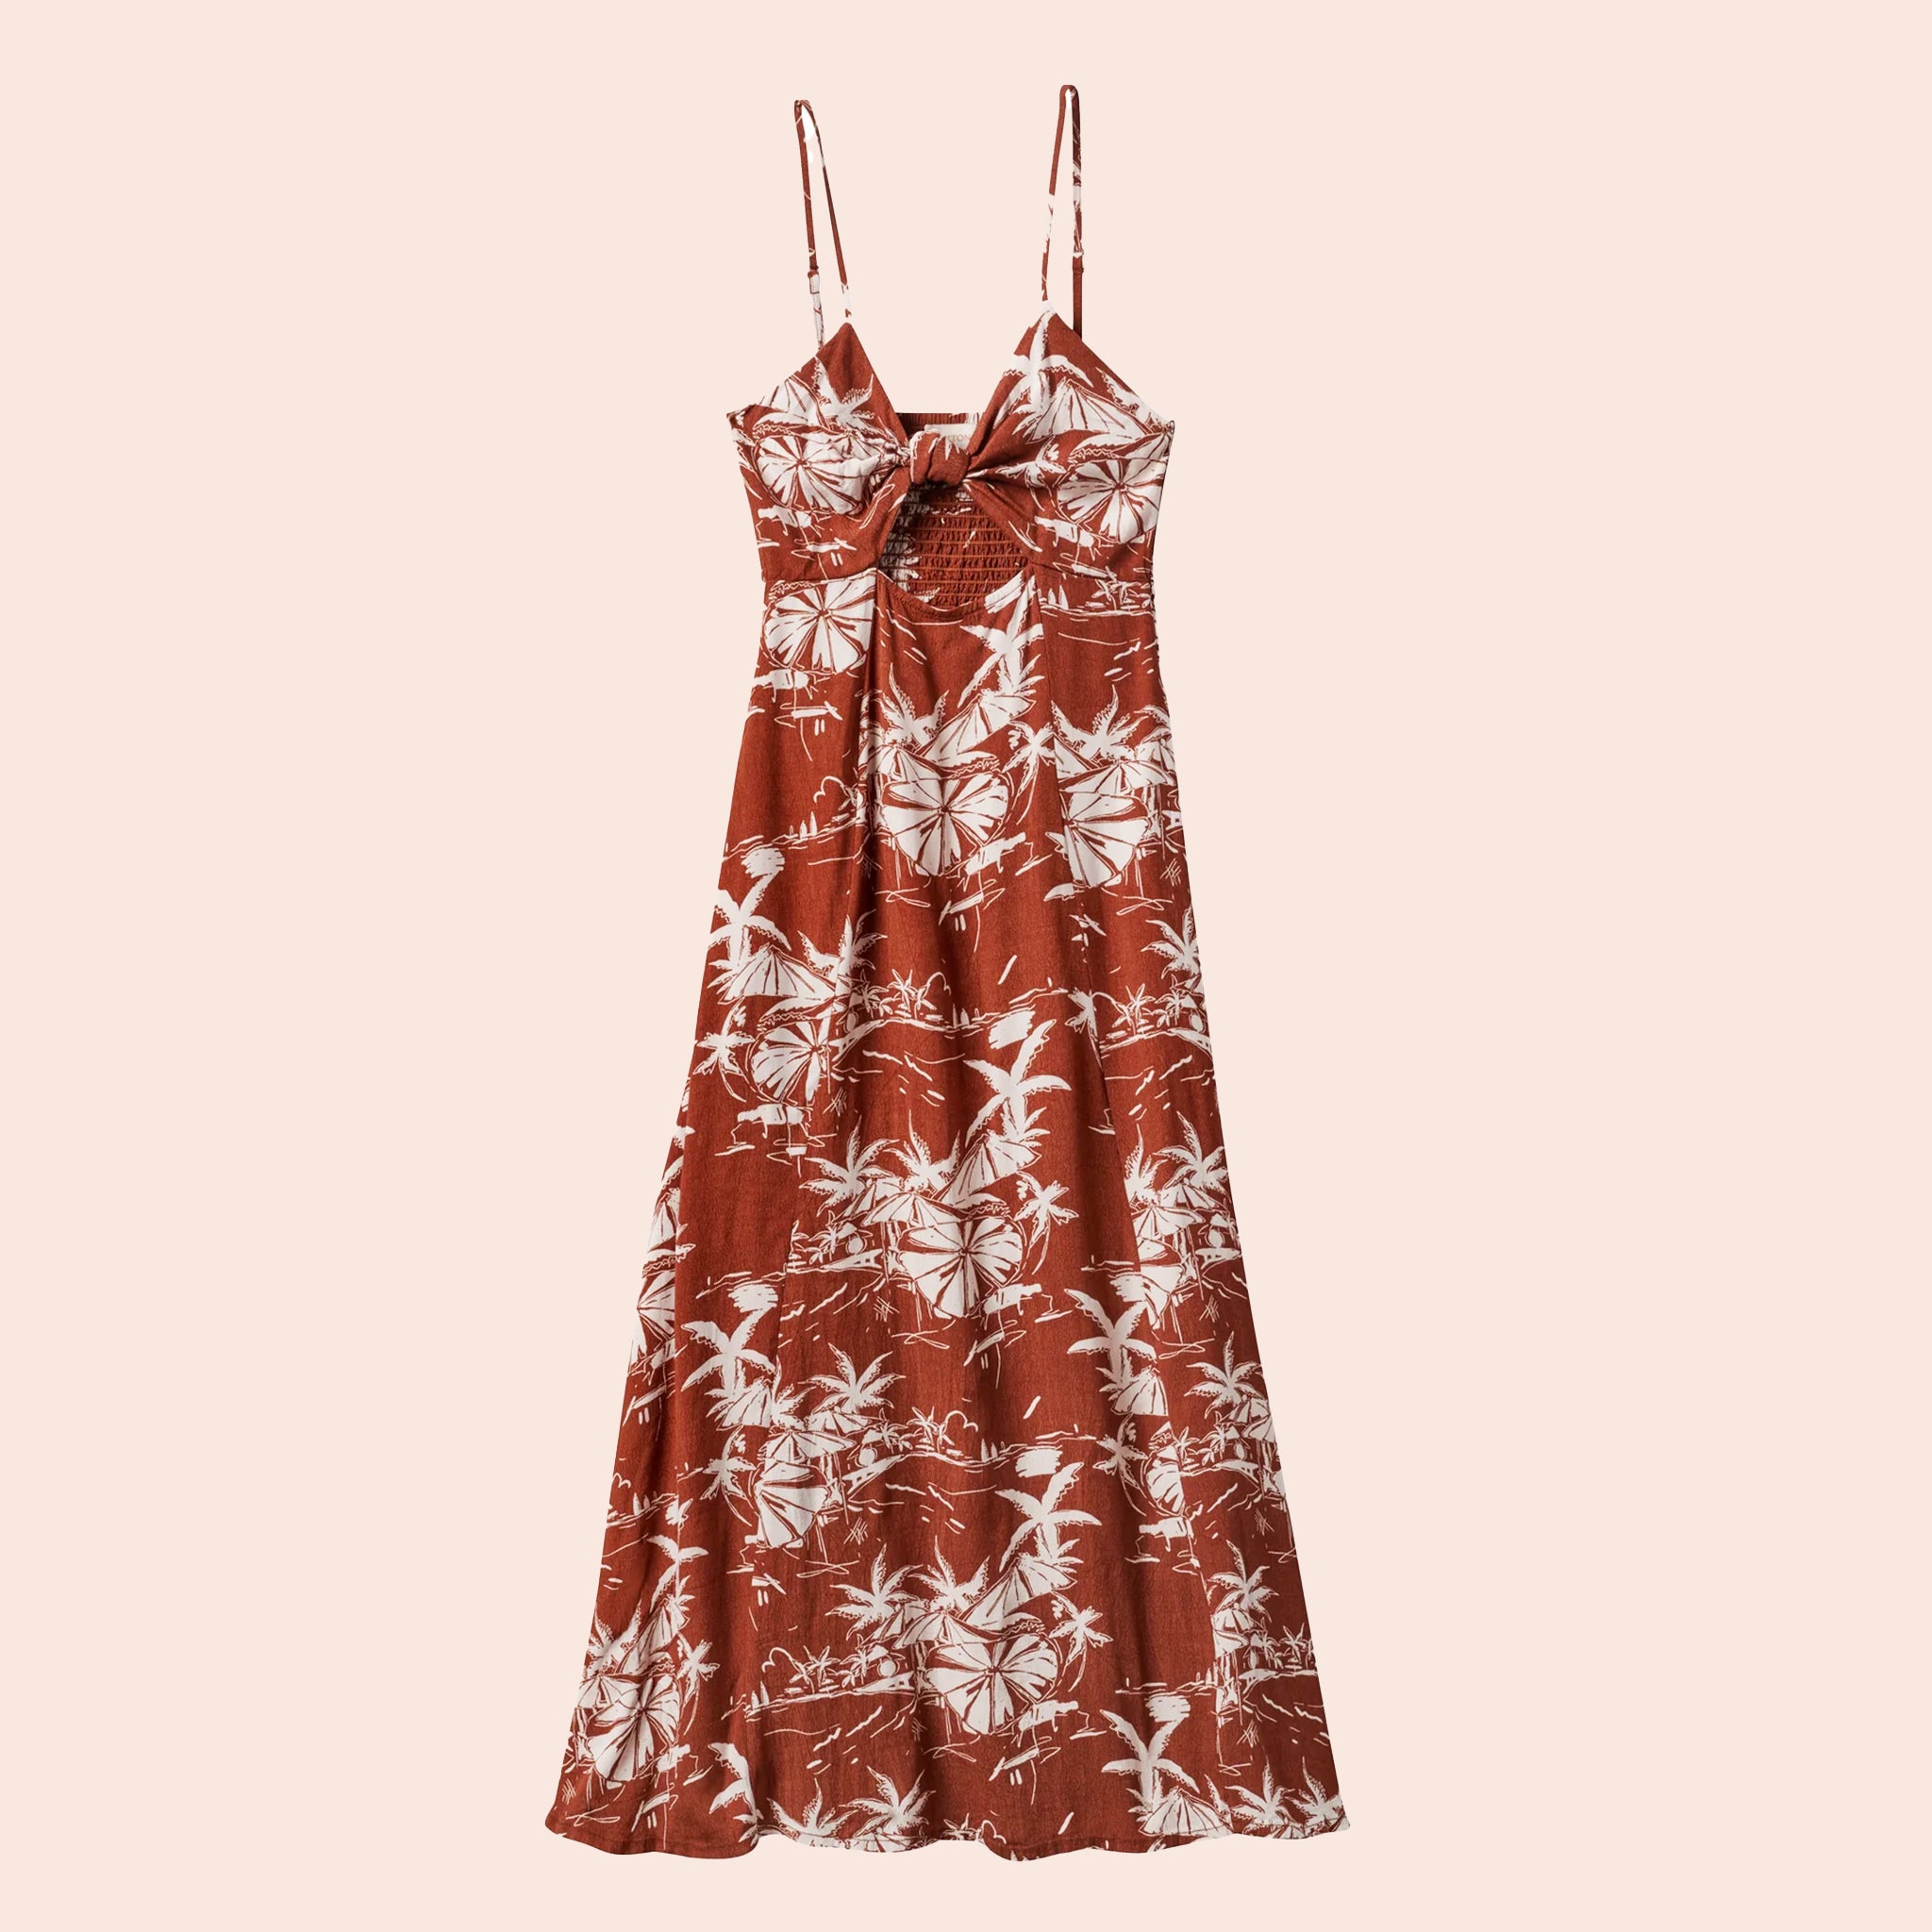 On a tan background is a rust colored dress with an ivory tropical print and a tie detail.